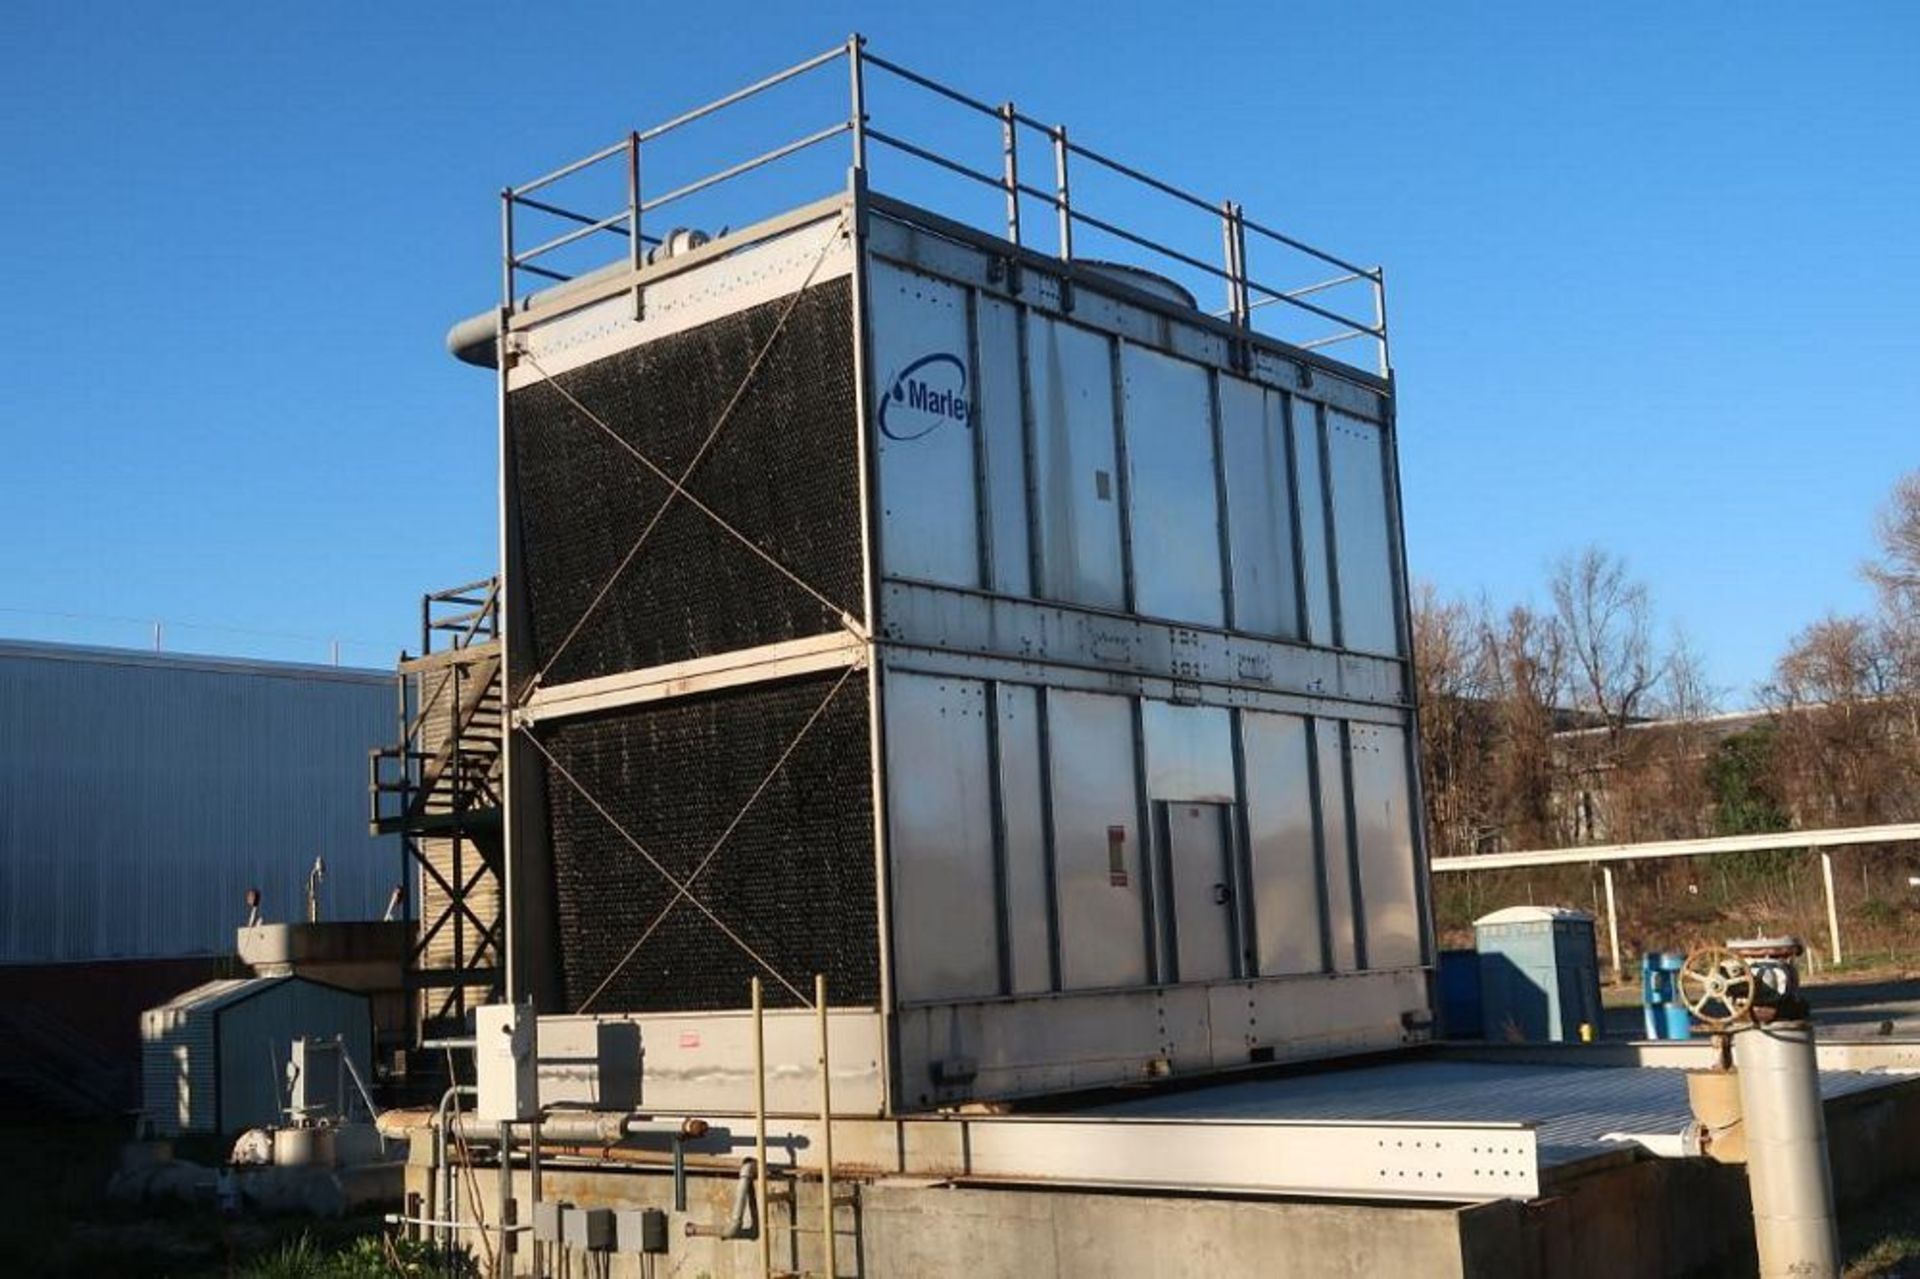 Marley 1000 Ton Double Flow Cooling Tower, 3800 Gallons per Minute, with (3) 75 HP Centrifugal Pumps